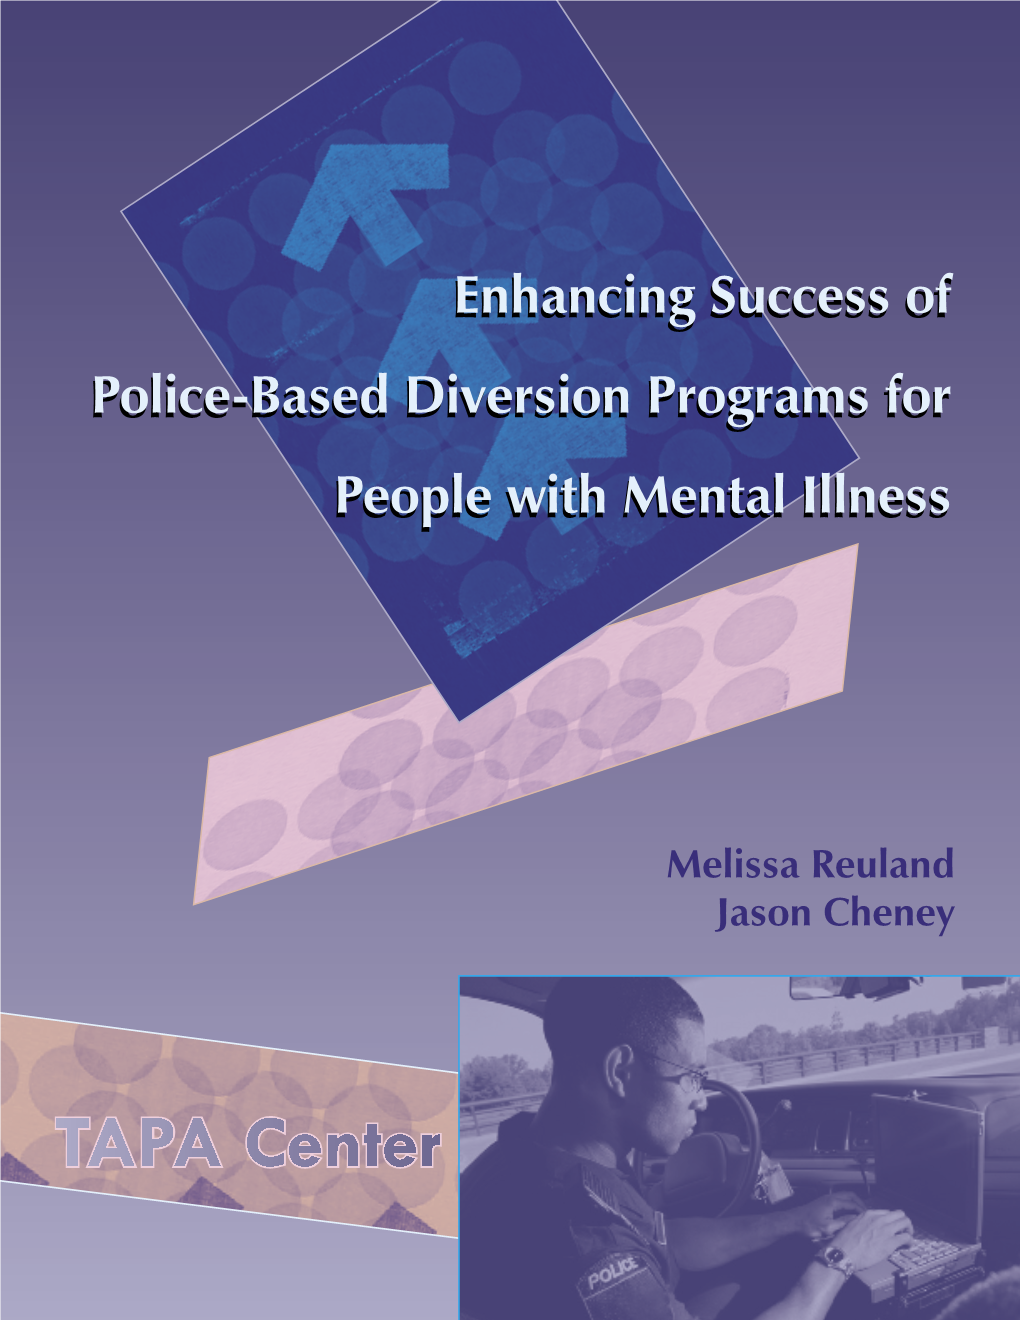 Enhancing Success of Police-Based Diversion Programs for People with Mental Illness